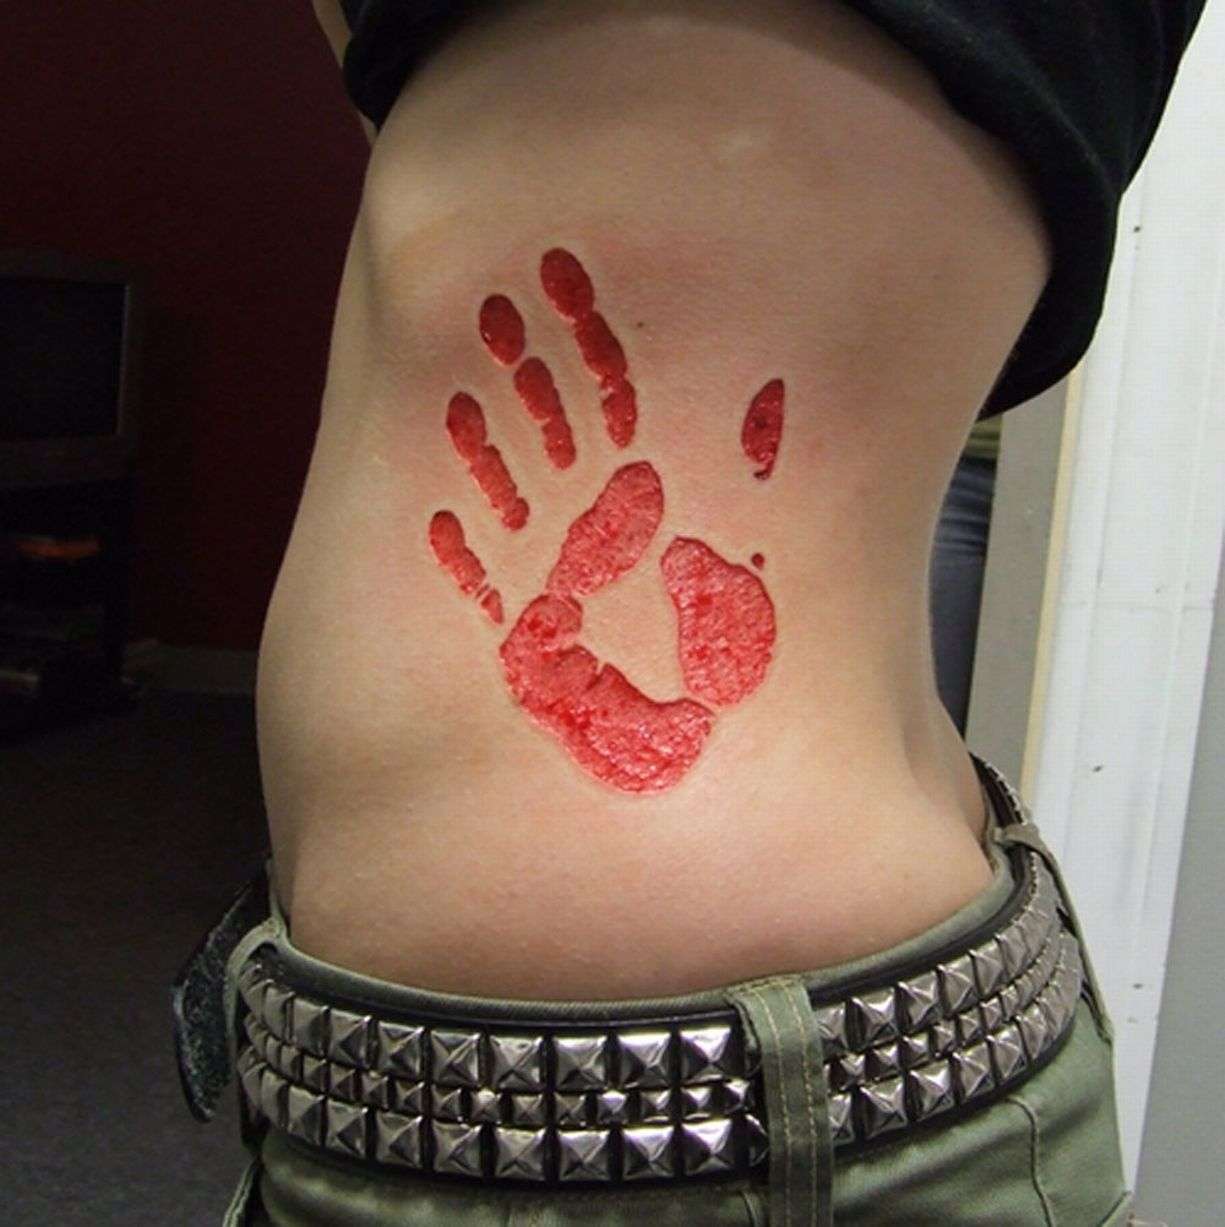 Sacrificial tattoo trend sees people cut, burn and etch skin